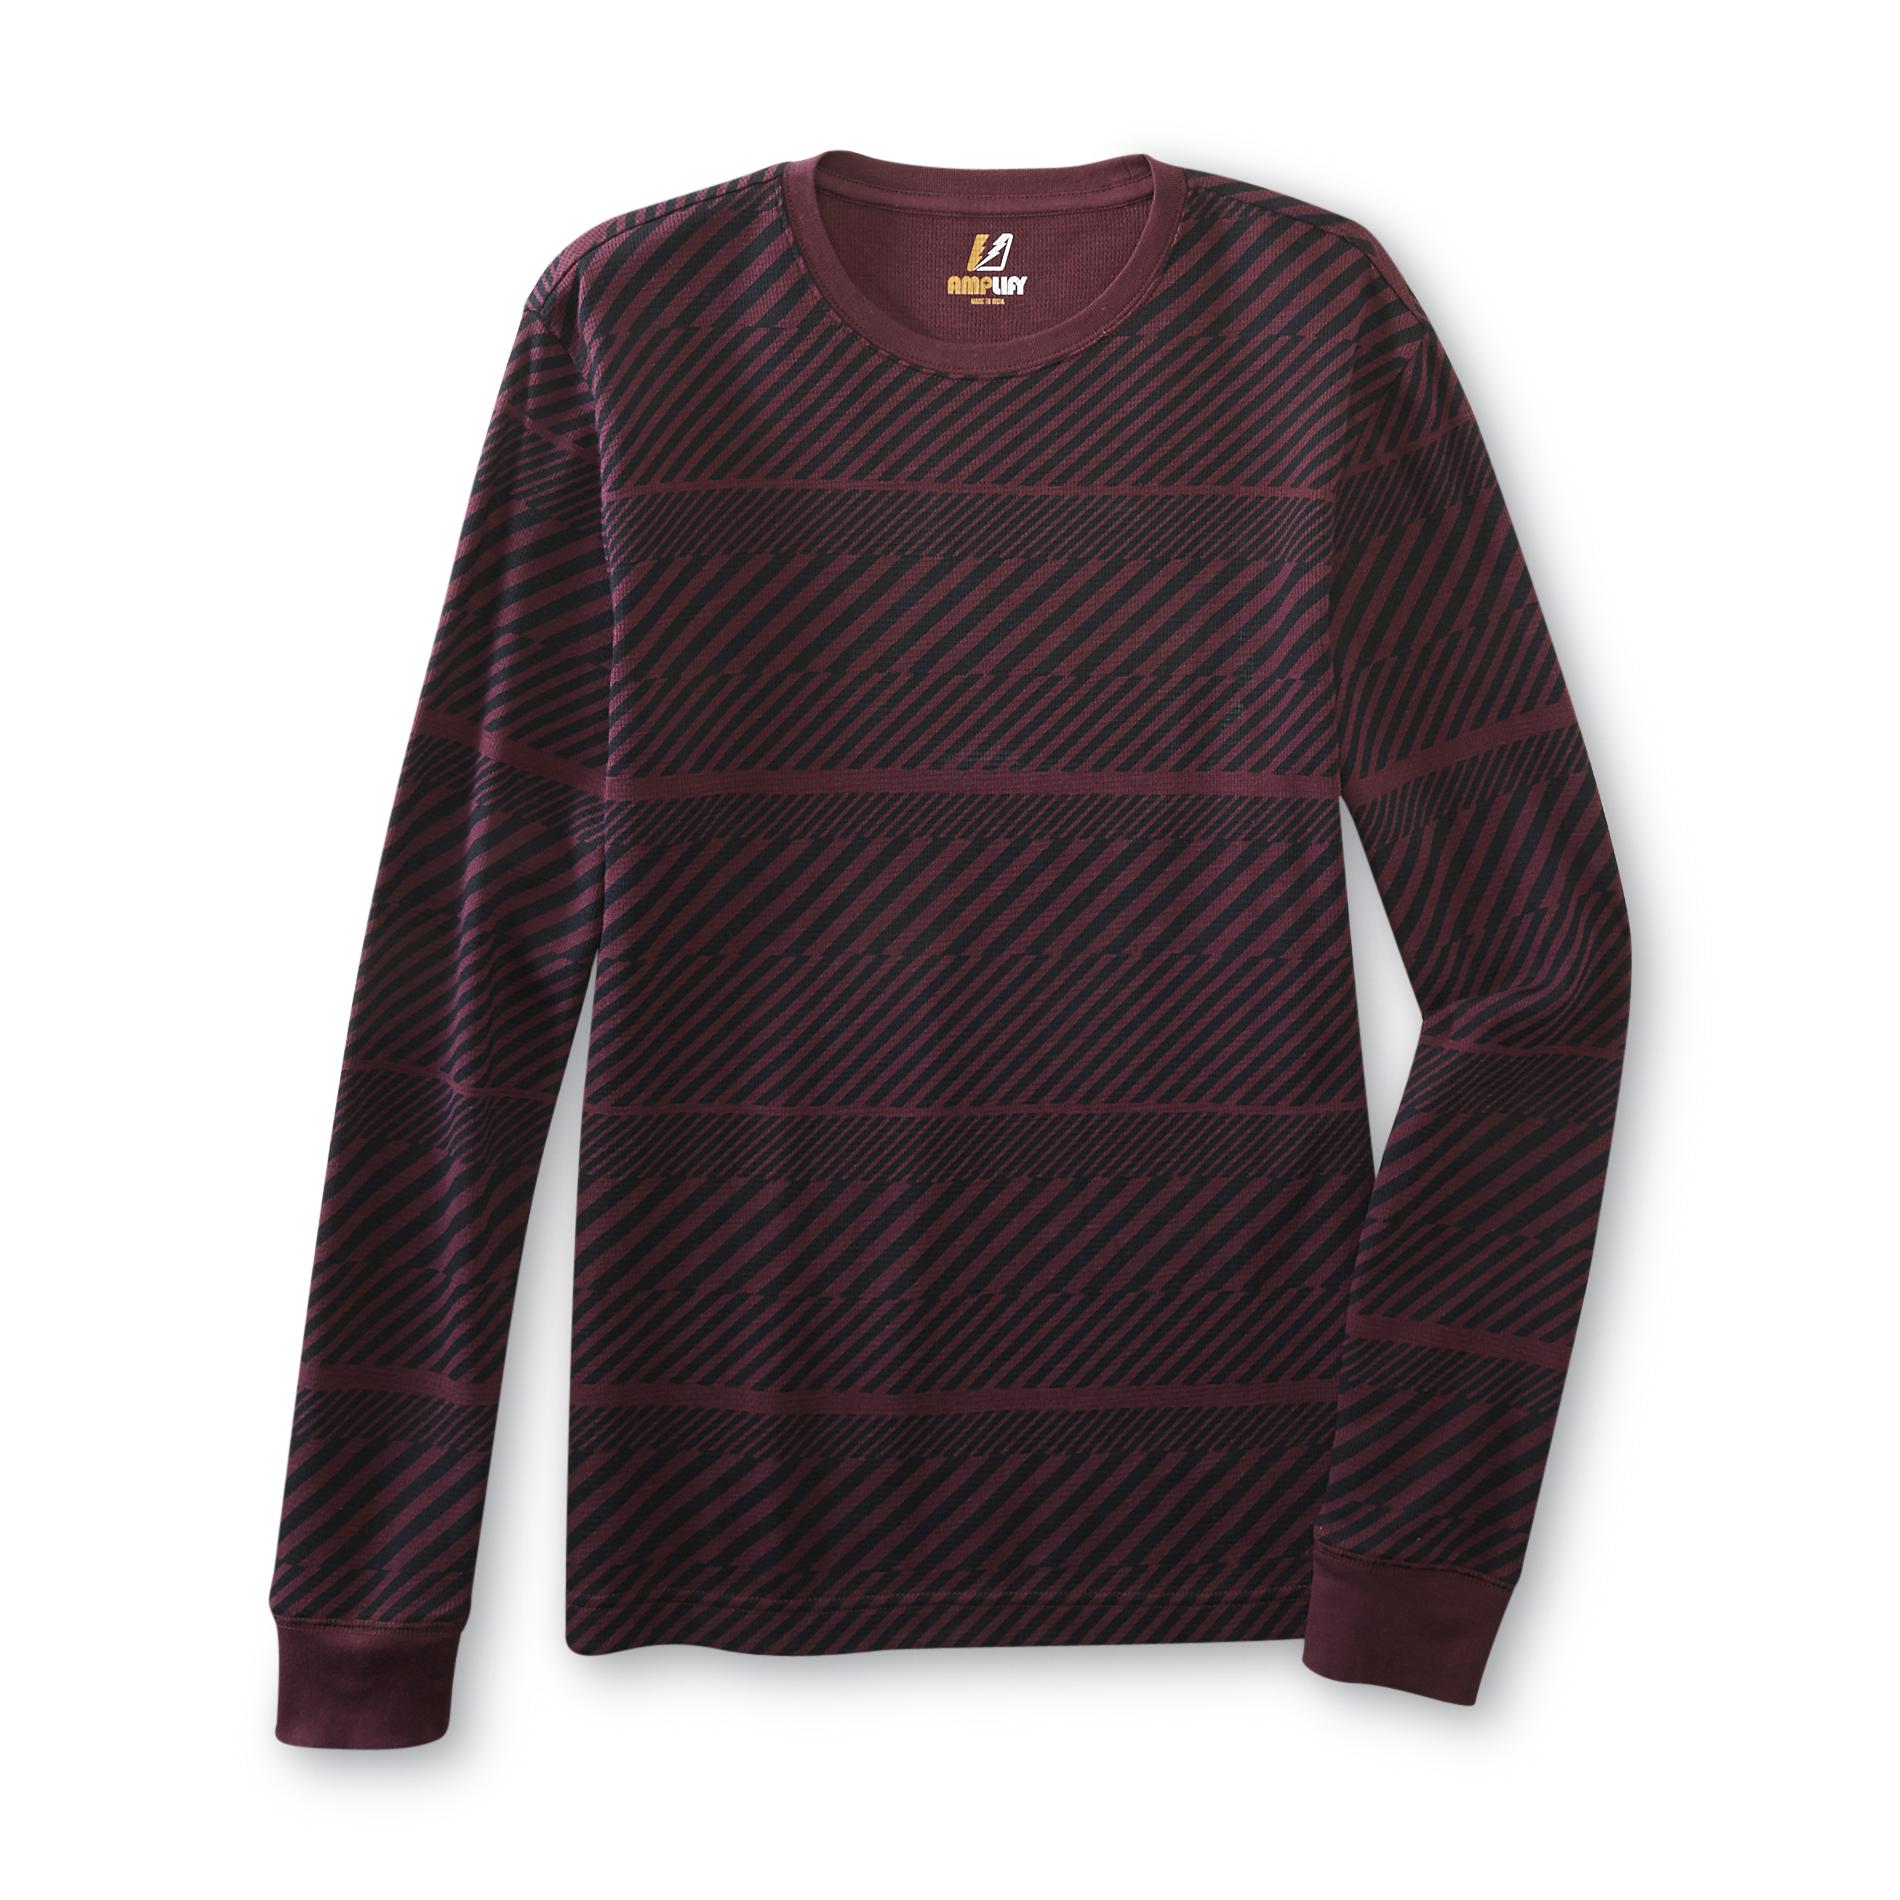 Amplify Young Men's Thermal Shirt - Abstract Stripe